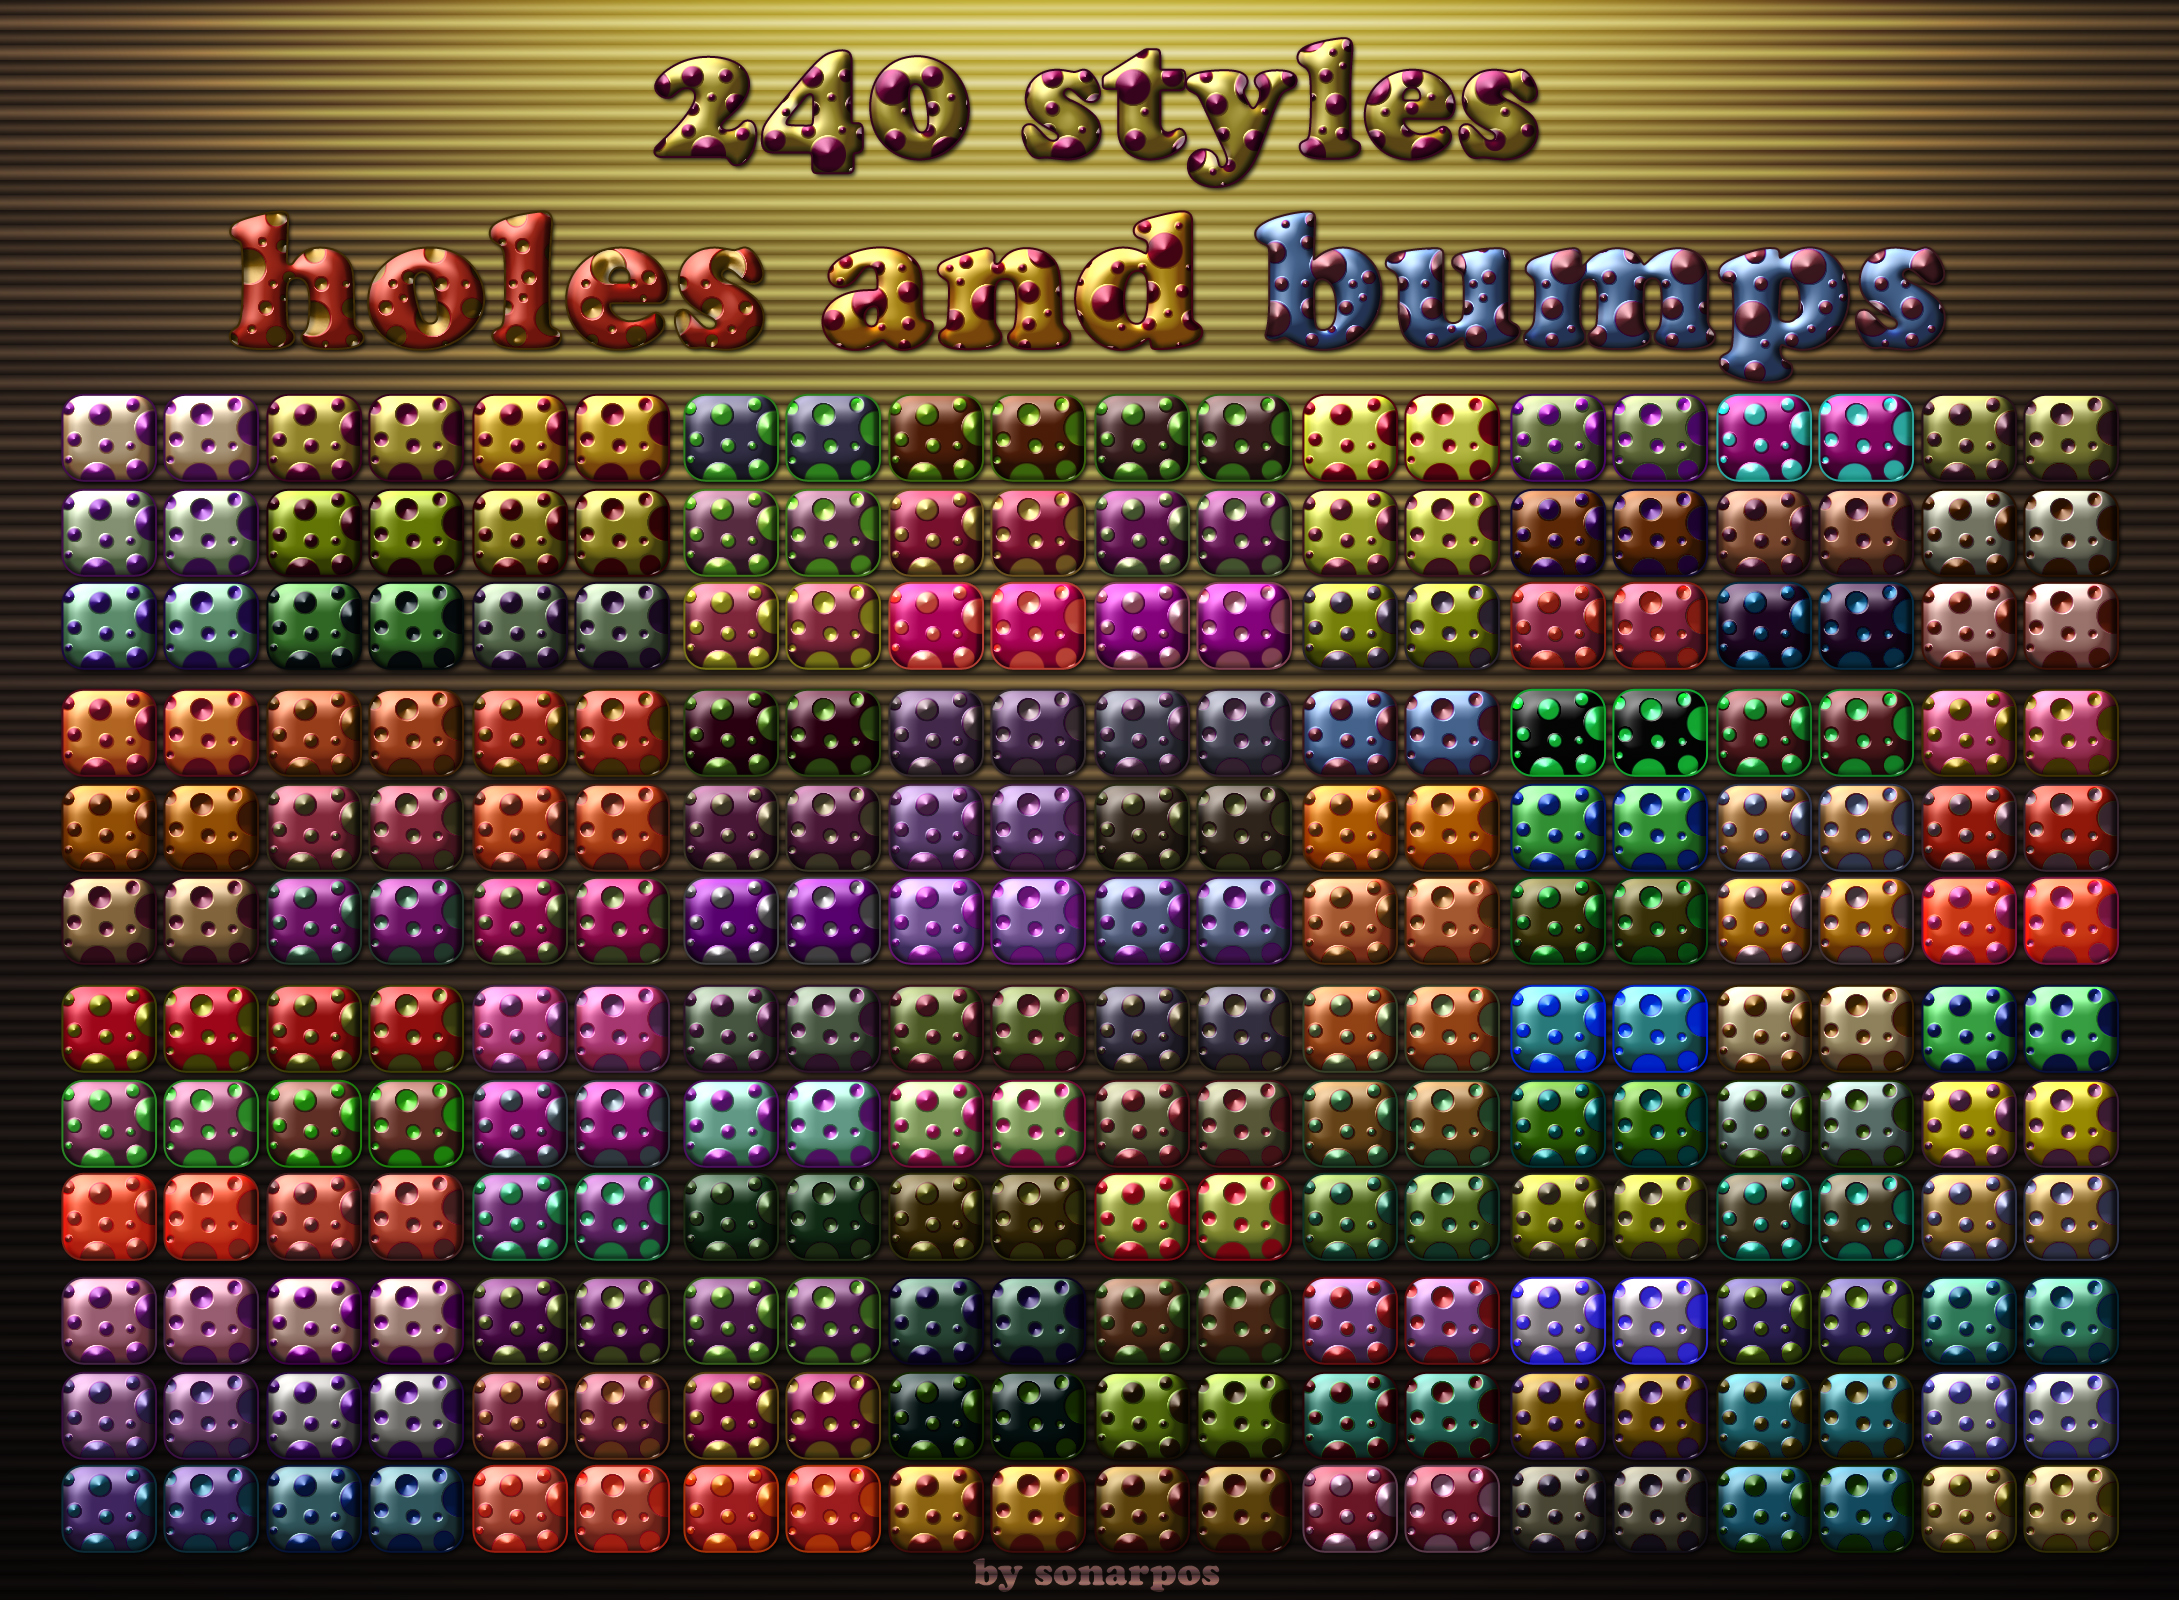 240 styles holes and bumps